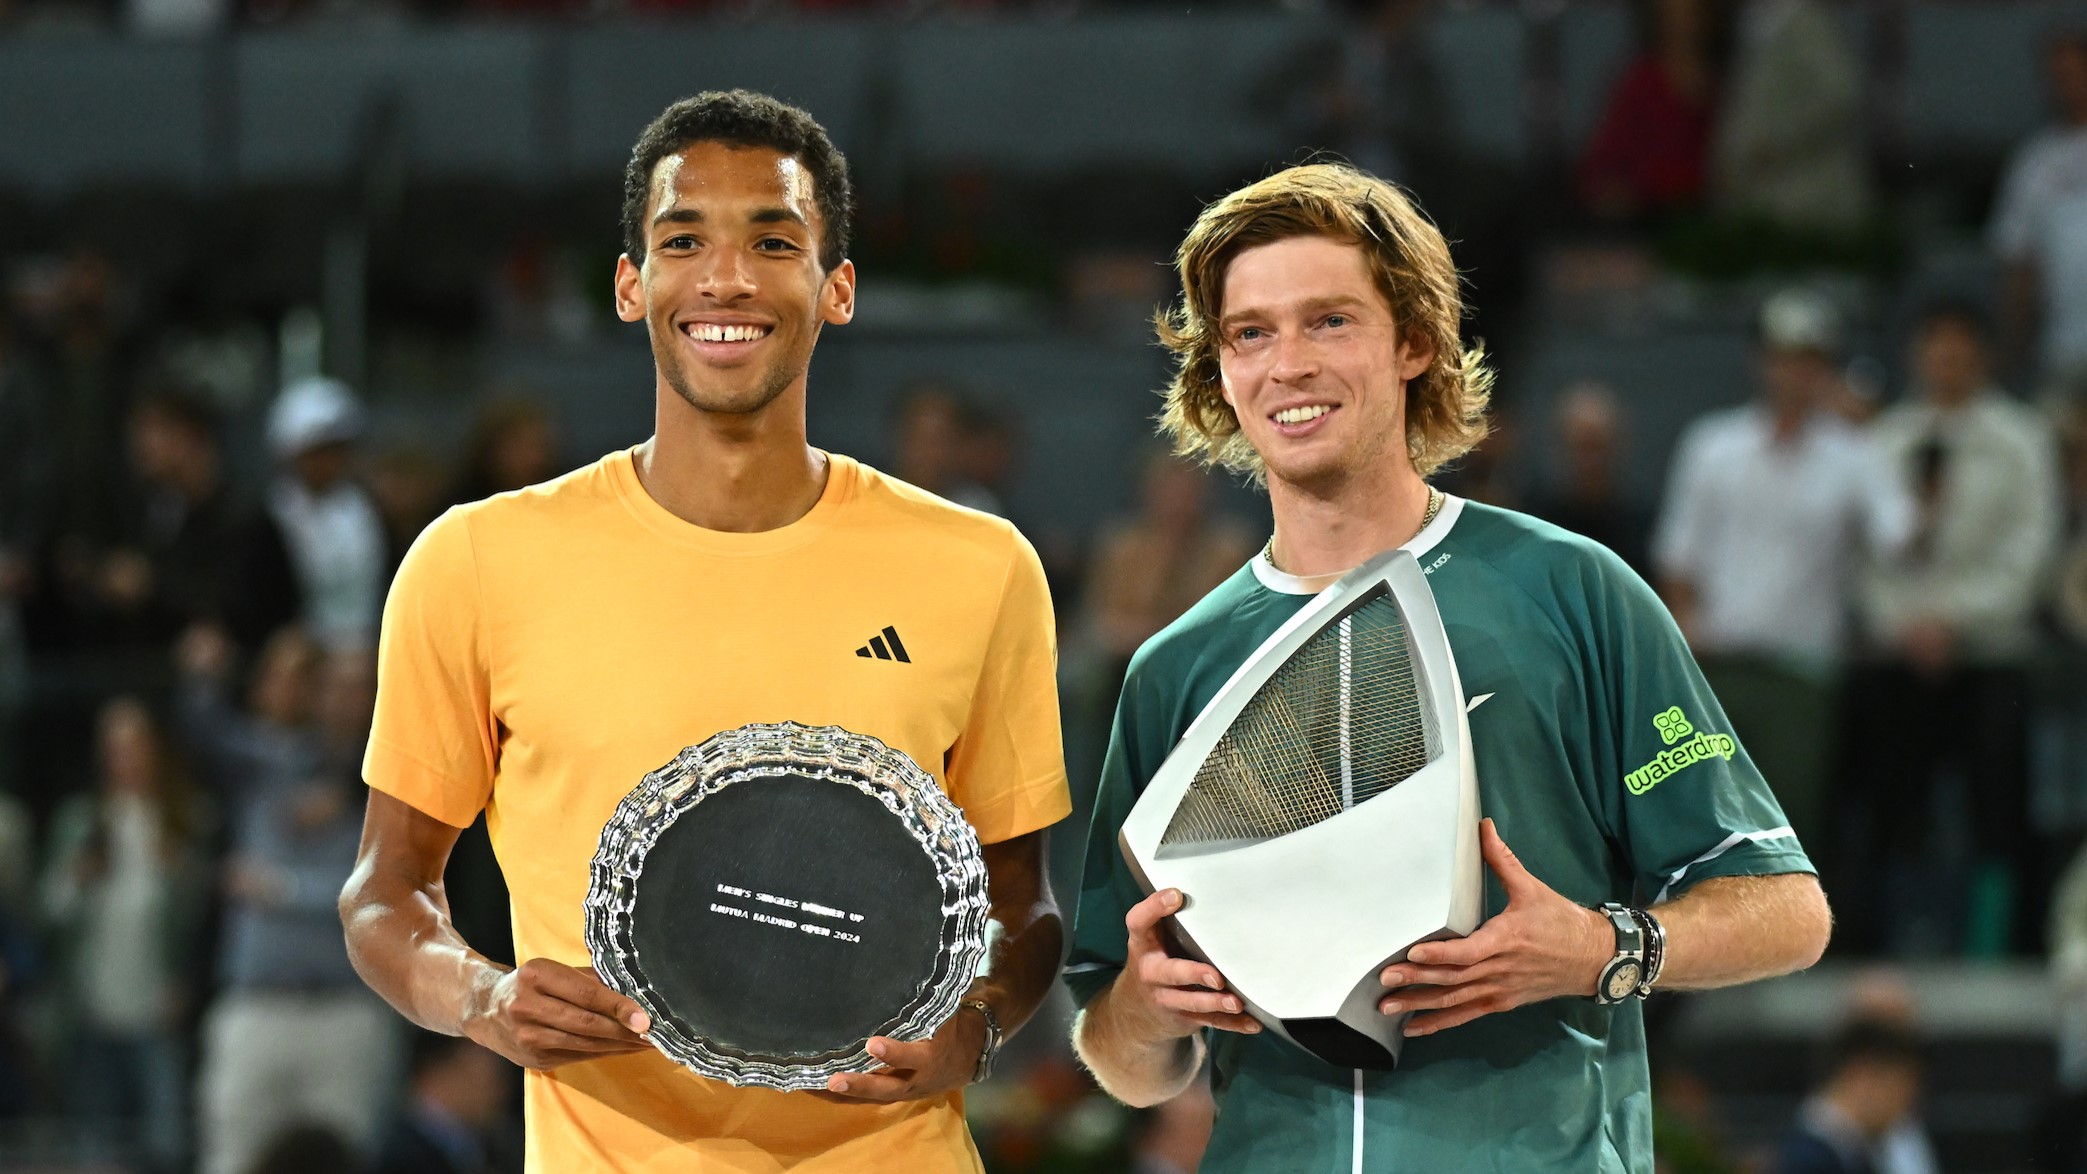 Felix Auger-Aliassime (left) holds up his runner-up trophy and smiles next to Andrey Rublev, holding his champions trophy in Madrid.